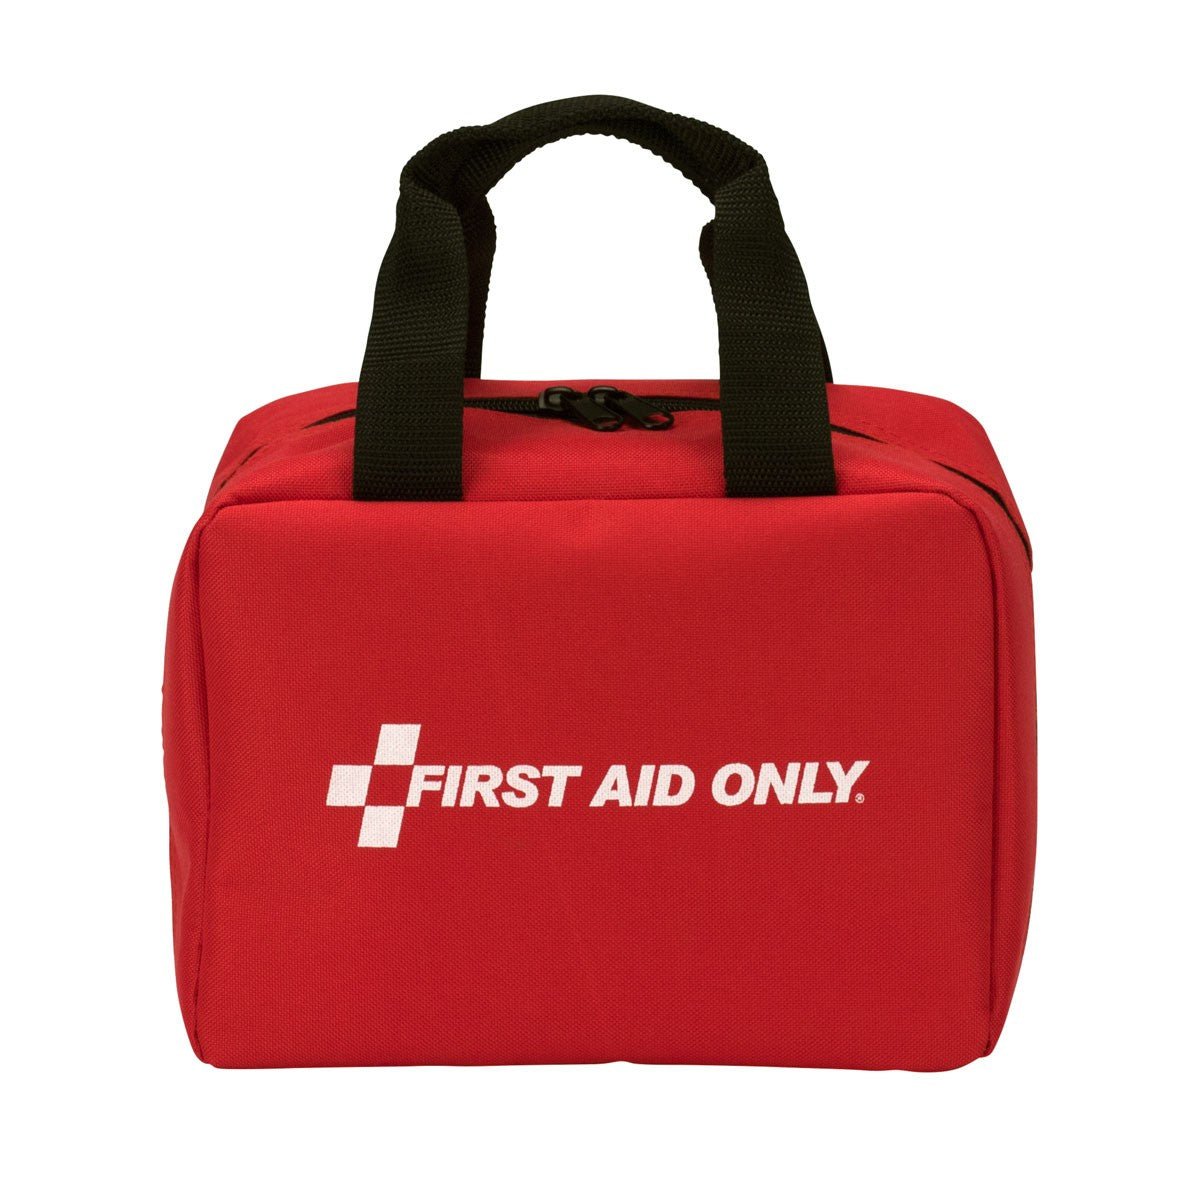 50 Person First Aid Kit, ANSI A+, Fabric Case - BS-FAK-90599-1-FM